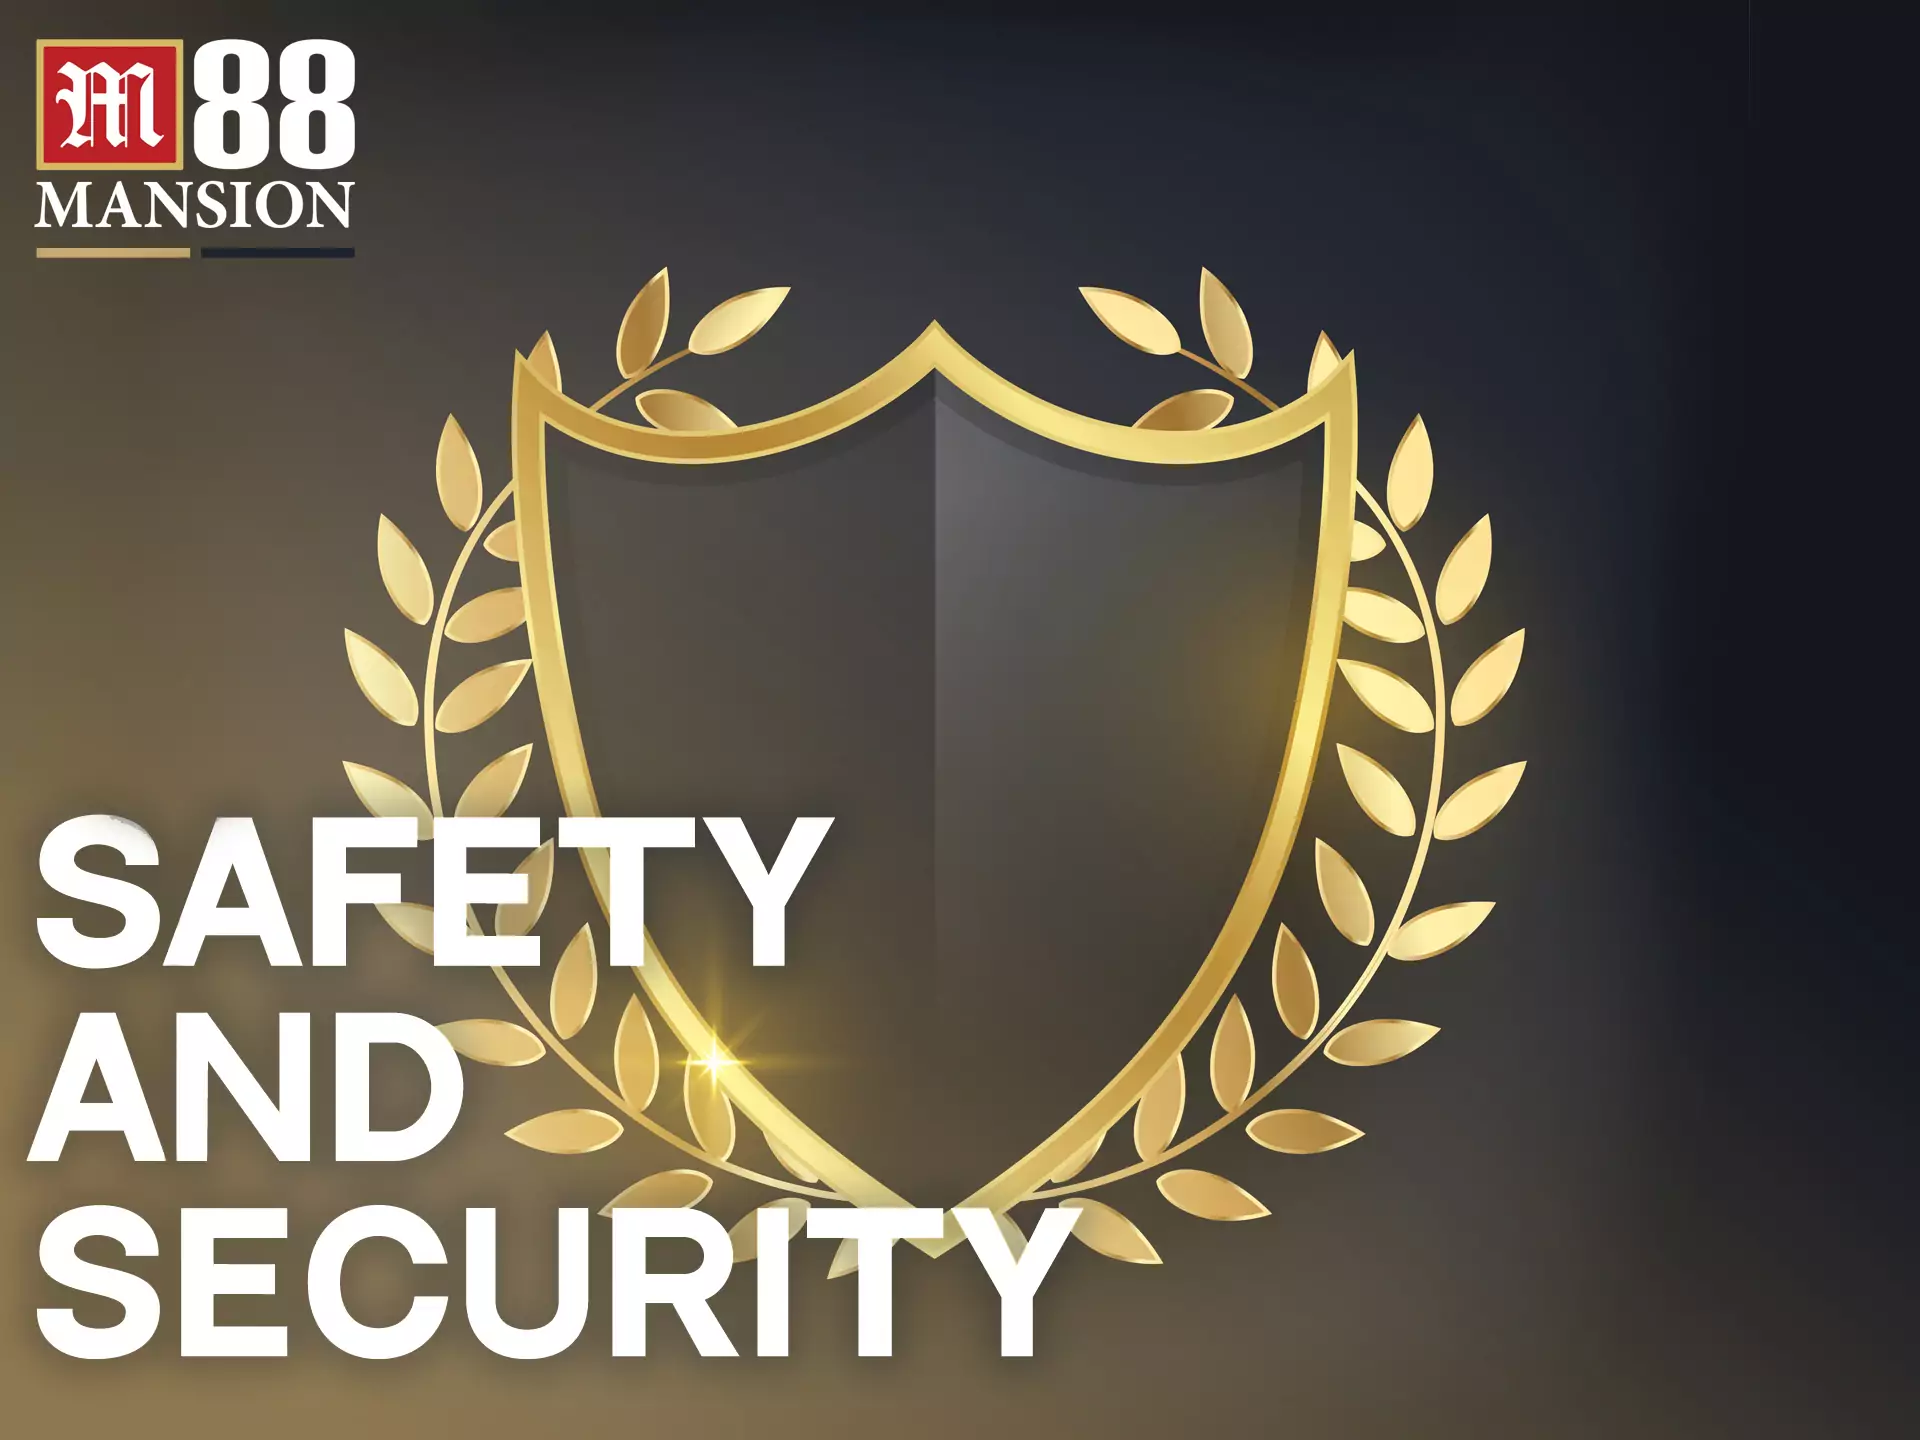 The M88 site is a safe and secure place for online betting.